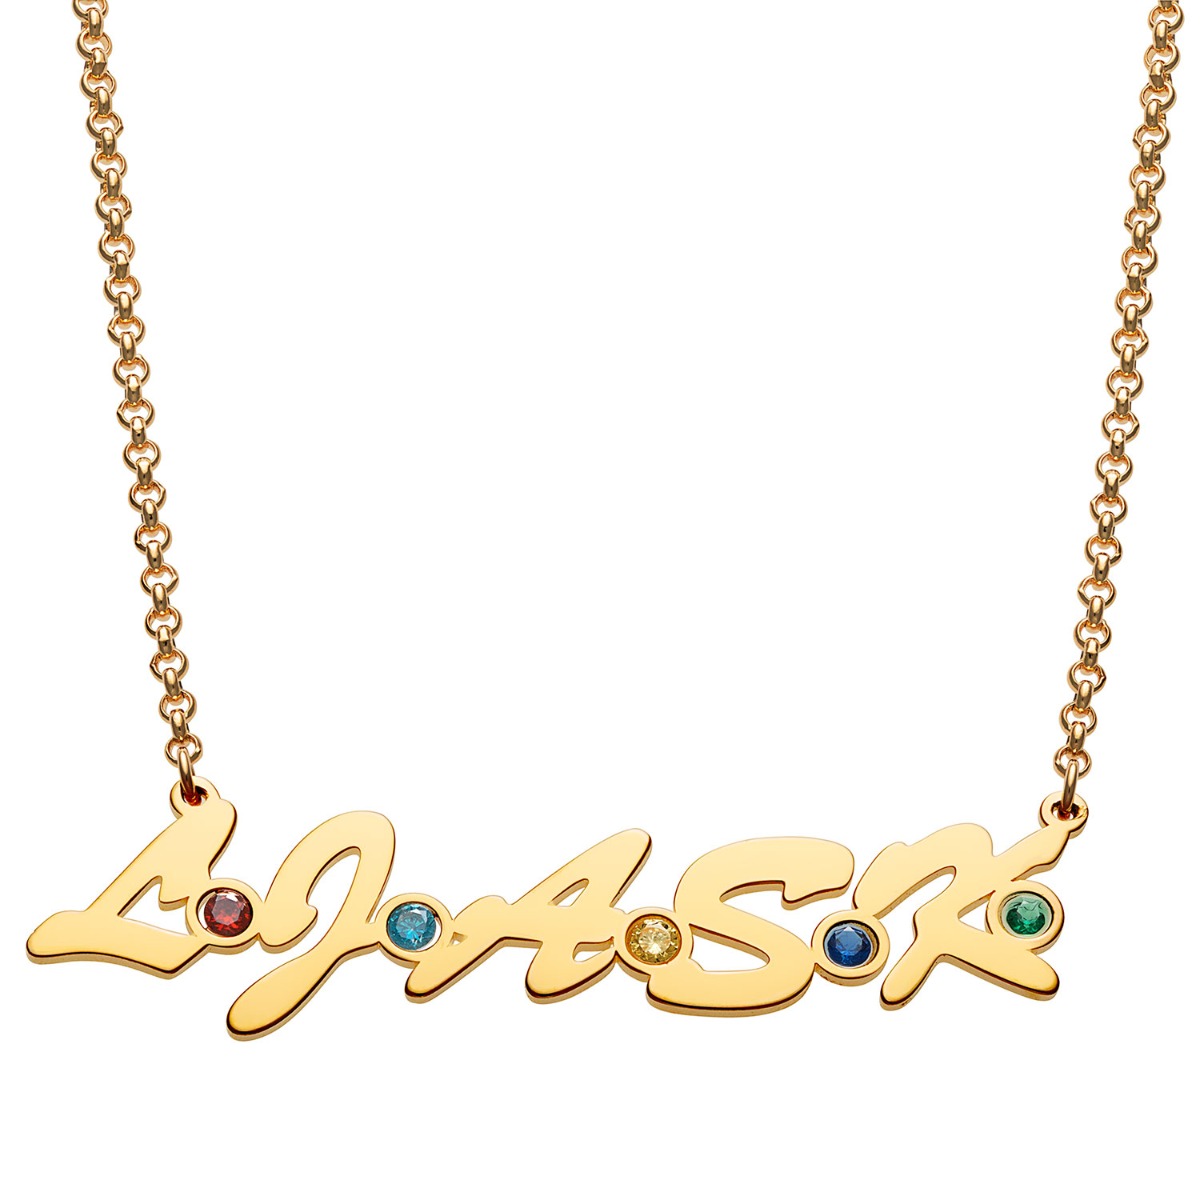 14K Gold Plated Family Initials and Birthstones Necklace 